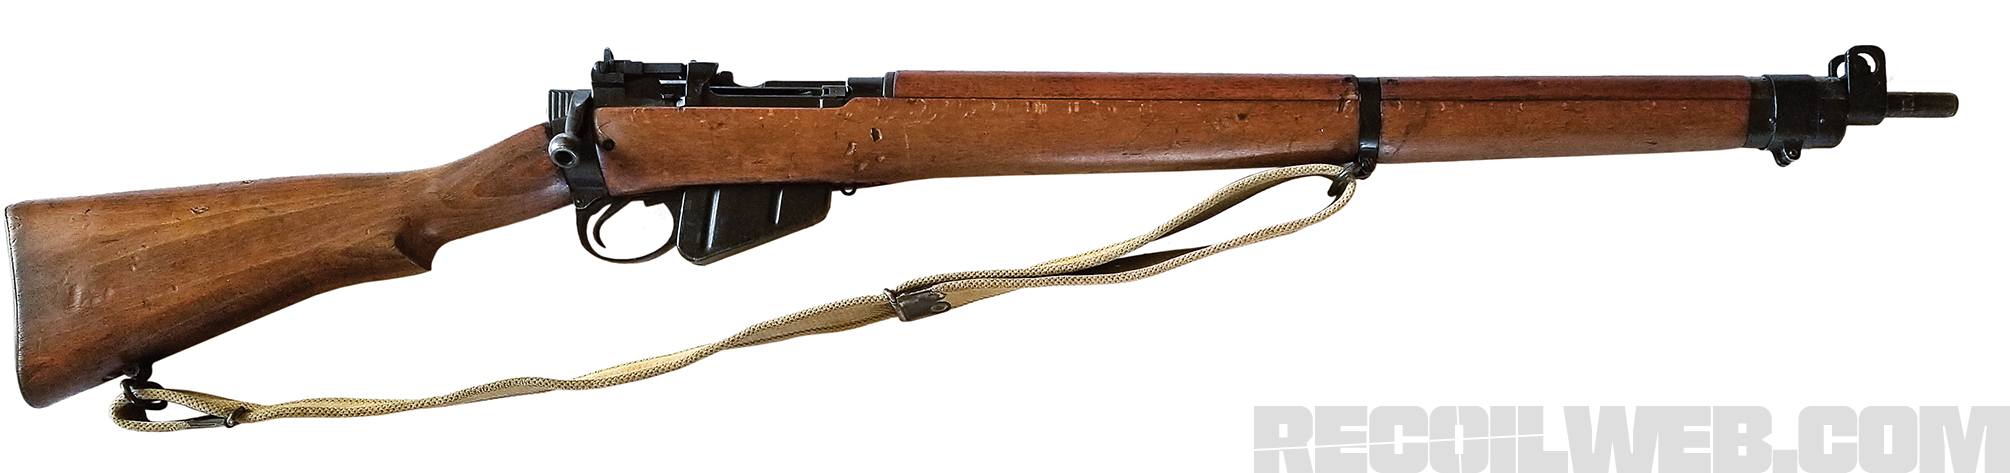 Old School: No. 4 Mk. 2 Enfield Rifle | RECOIL